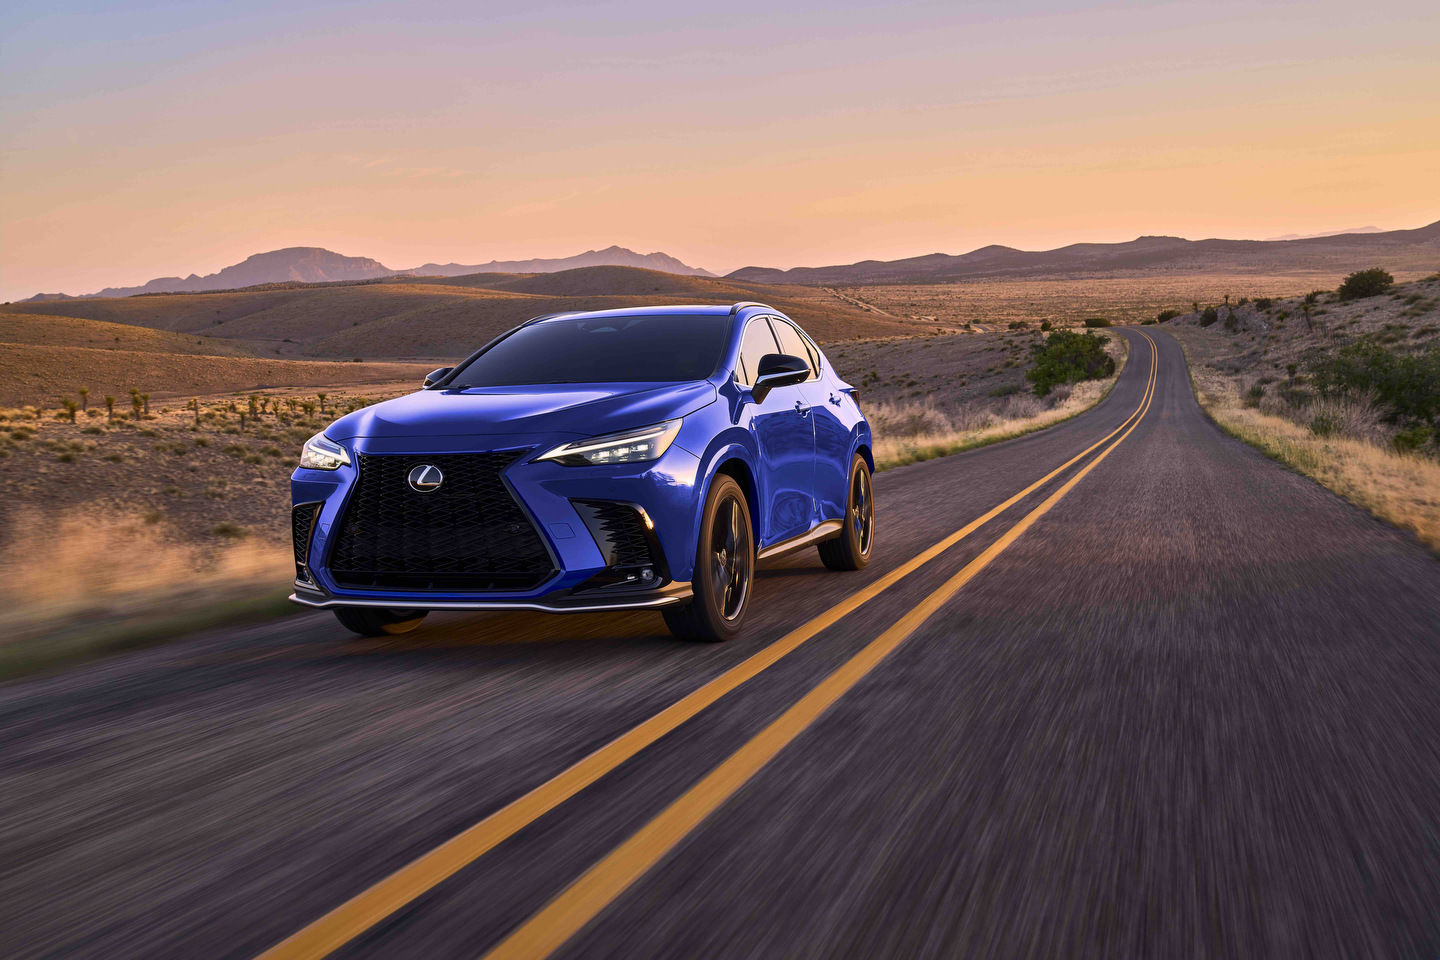 2022 Lexus NX 450h+ plus 2022 Lexus NX 350h : Which is best for you?